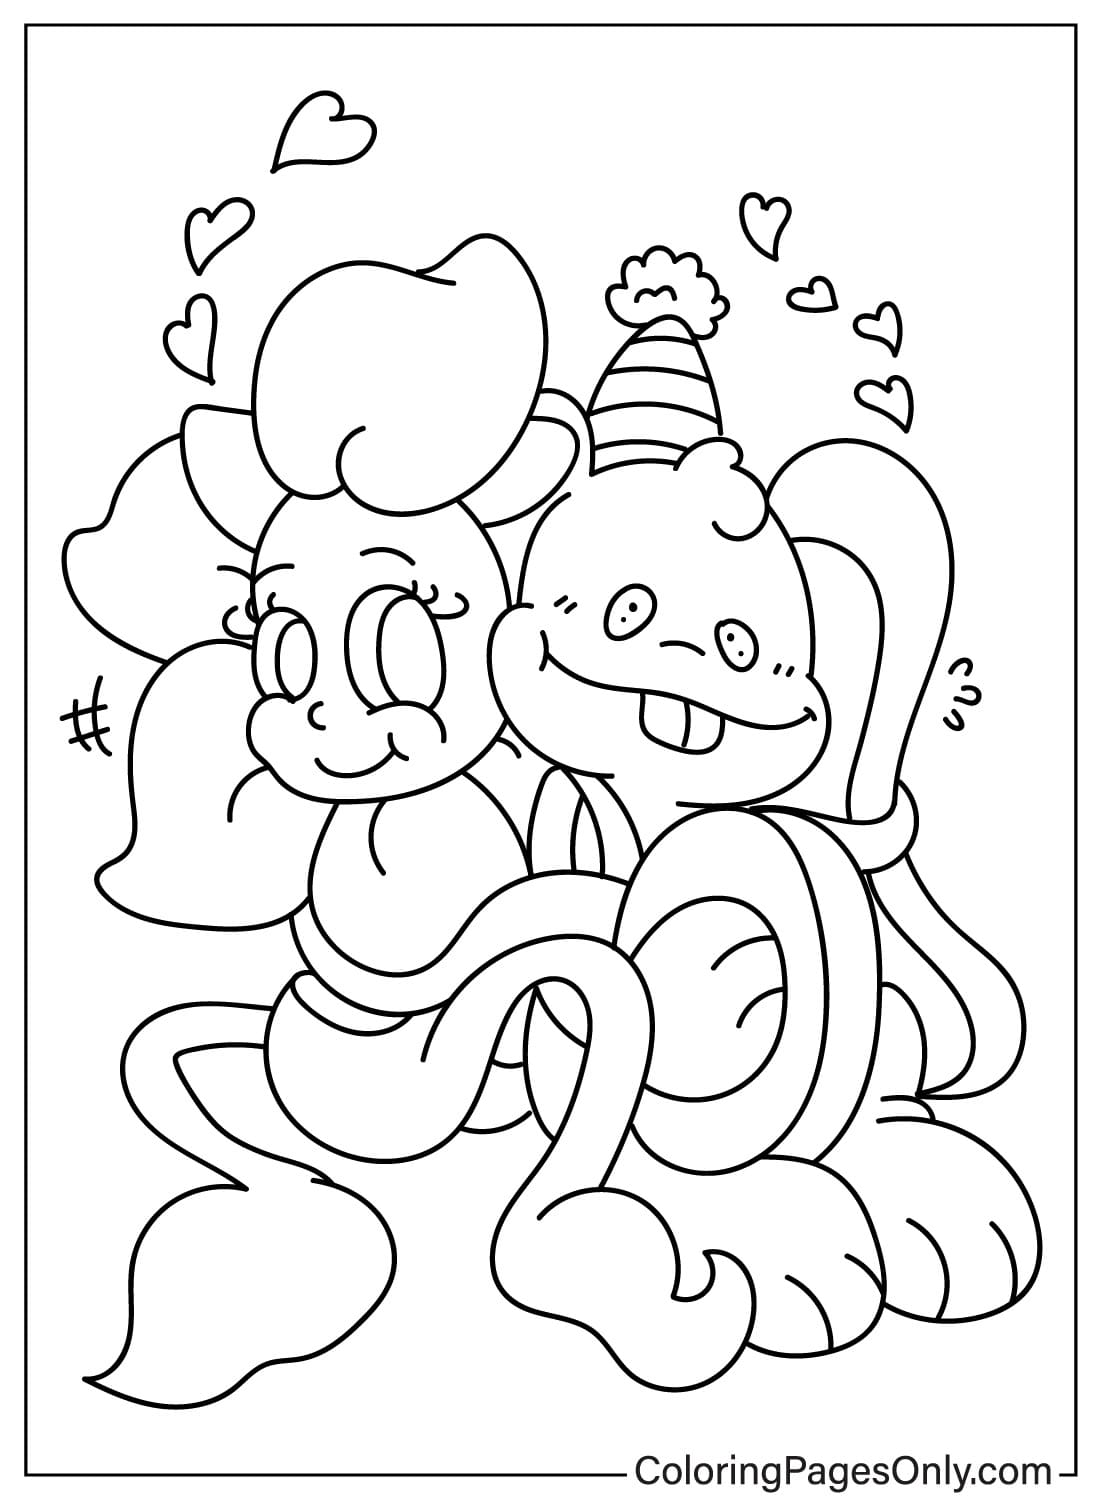 Poppy Playtime Coloring Page to Print from Poppy Playtime